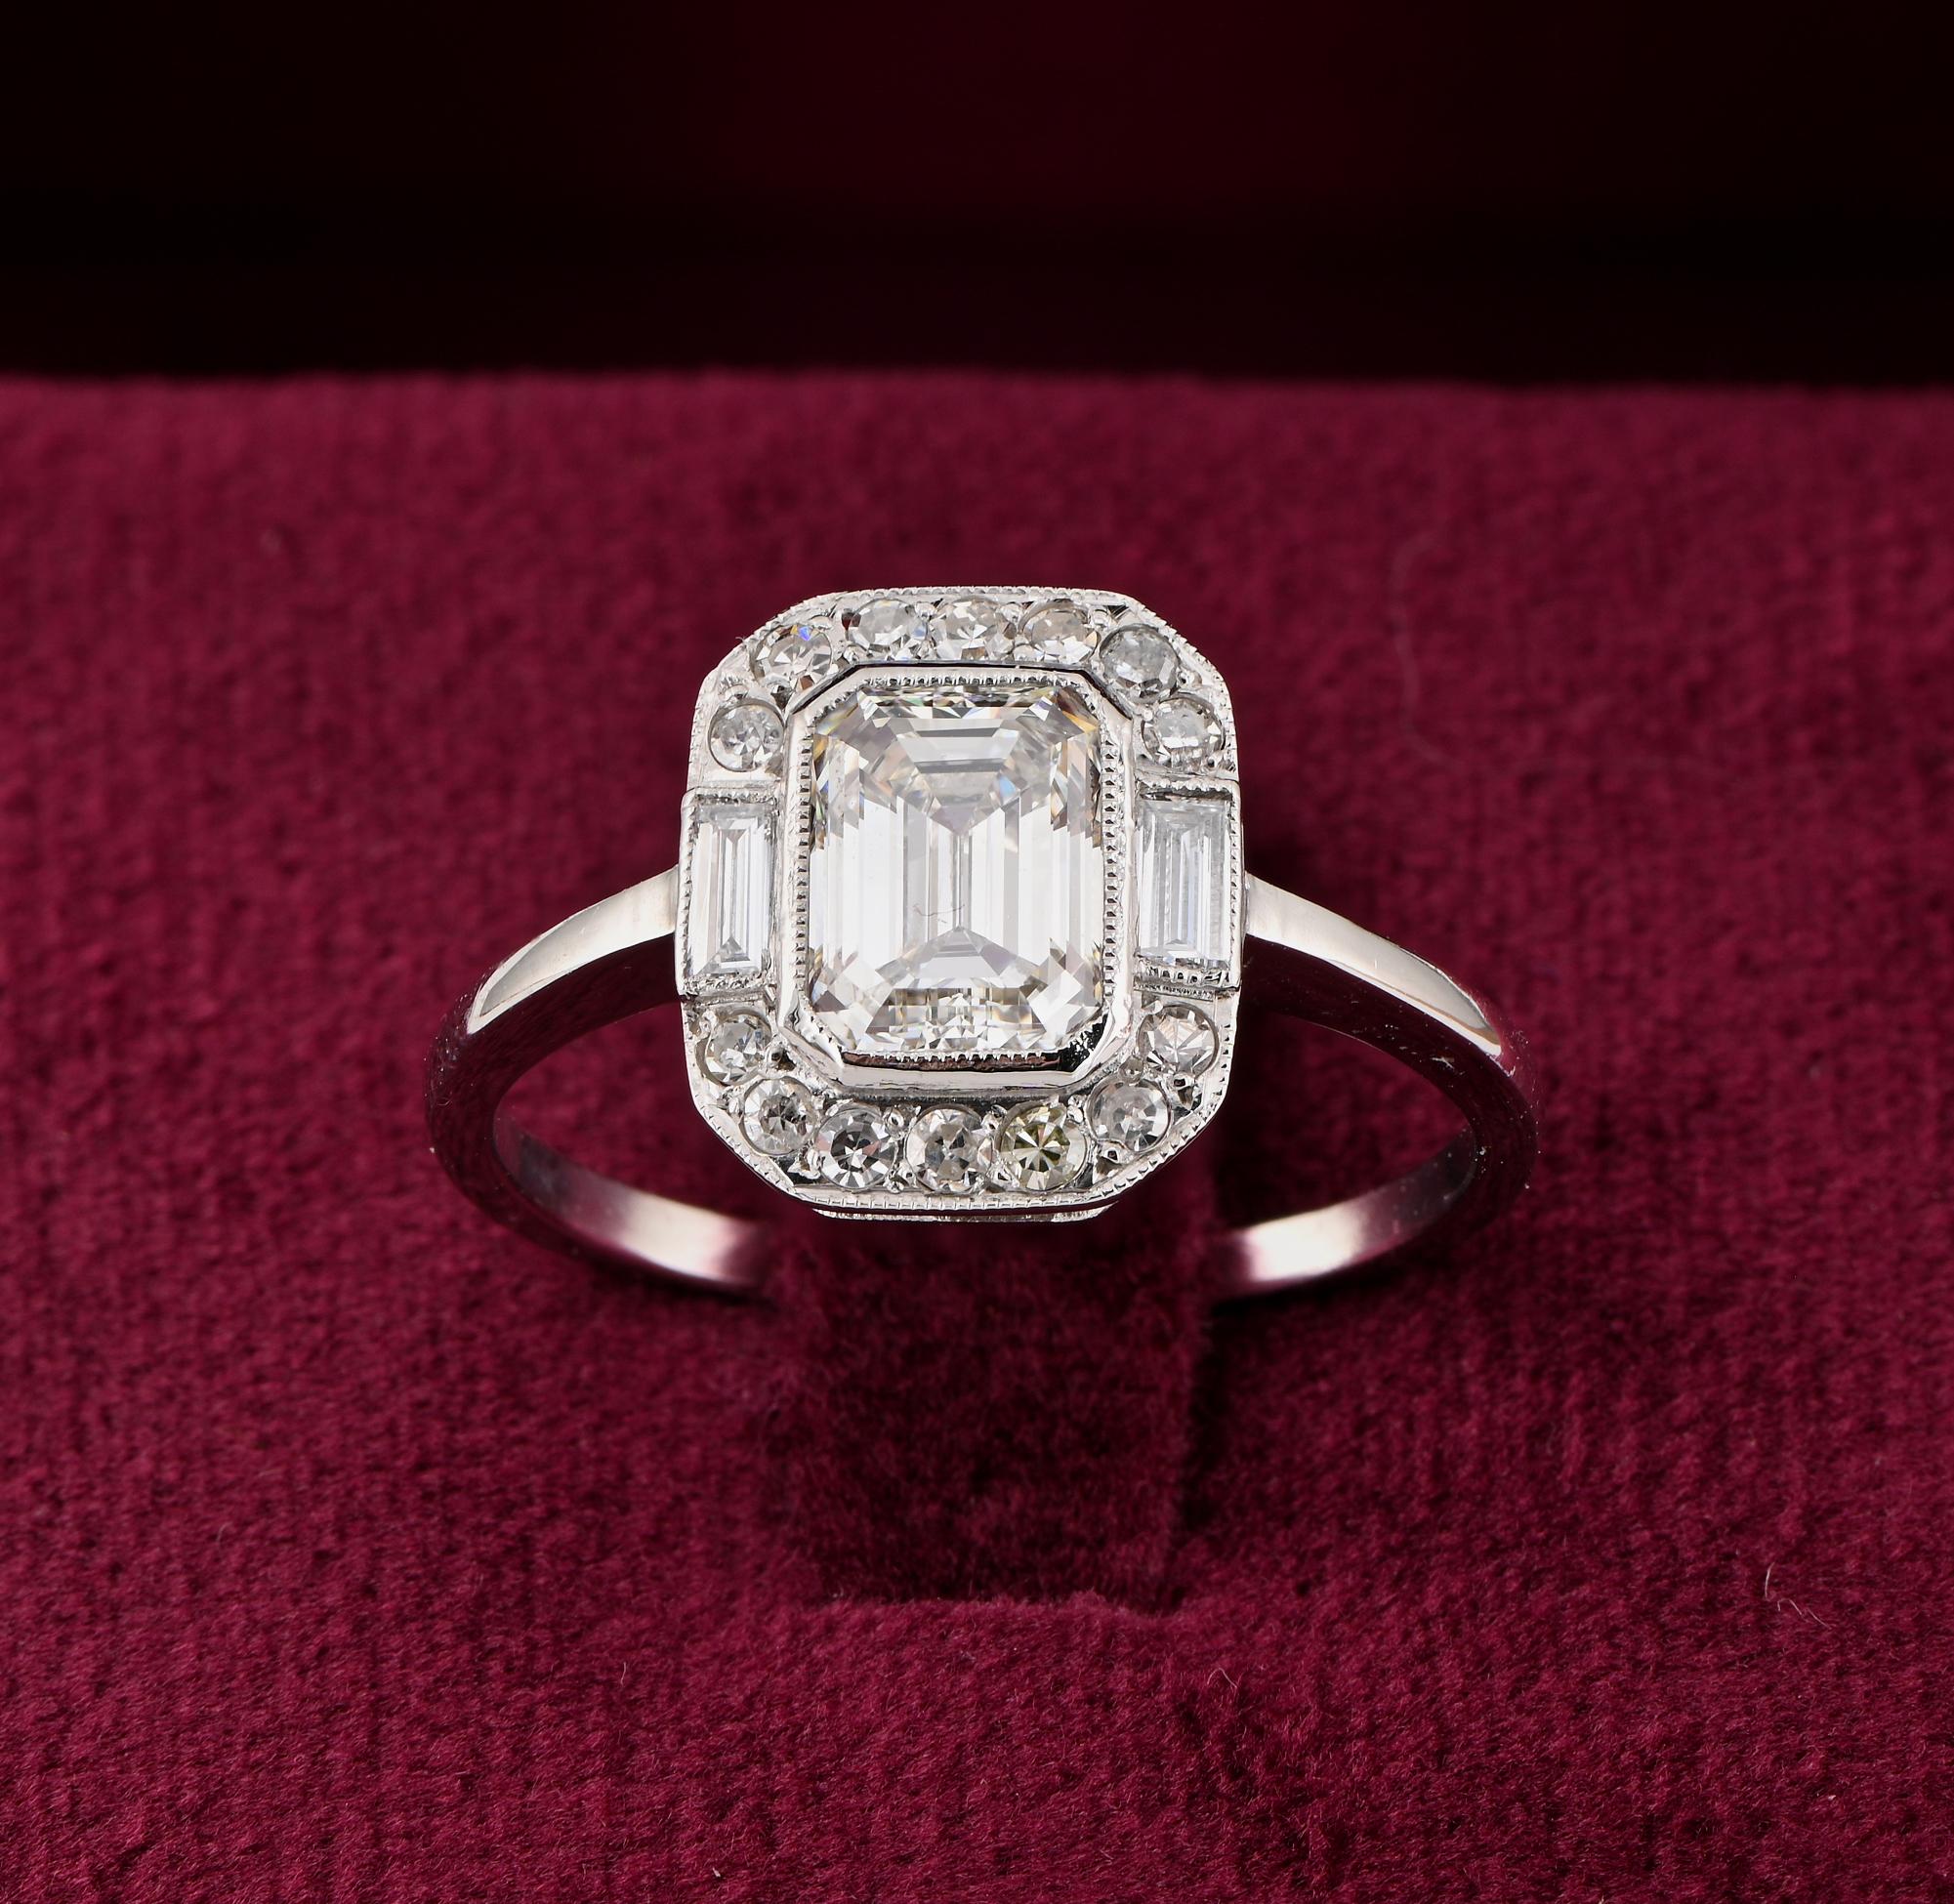 Diamond Allure
This superb Art Deco period Diamond solitaire ring is 1925 ca.
Hand crafted of solid Platinum in a timeless stunning design taking the shape from the centre Emerald cut Diamond with a surrounding border of baguette cut on sides and